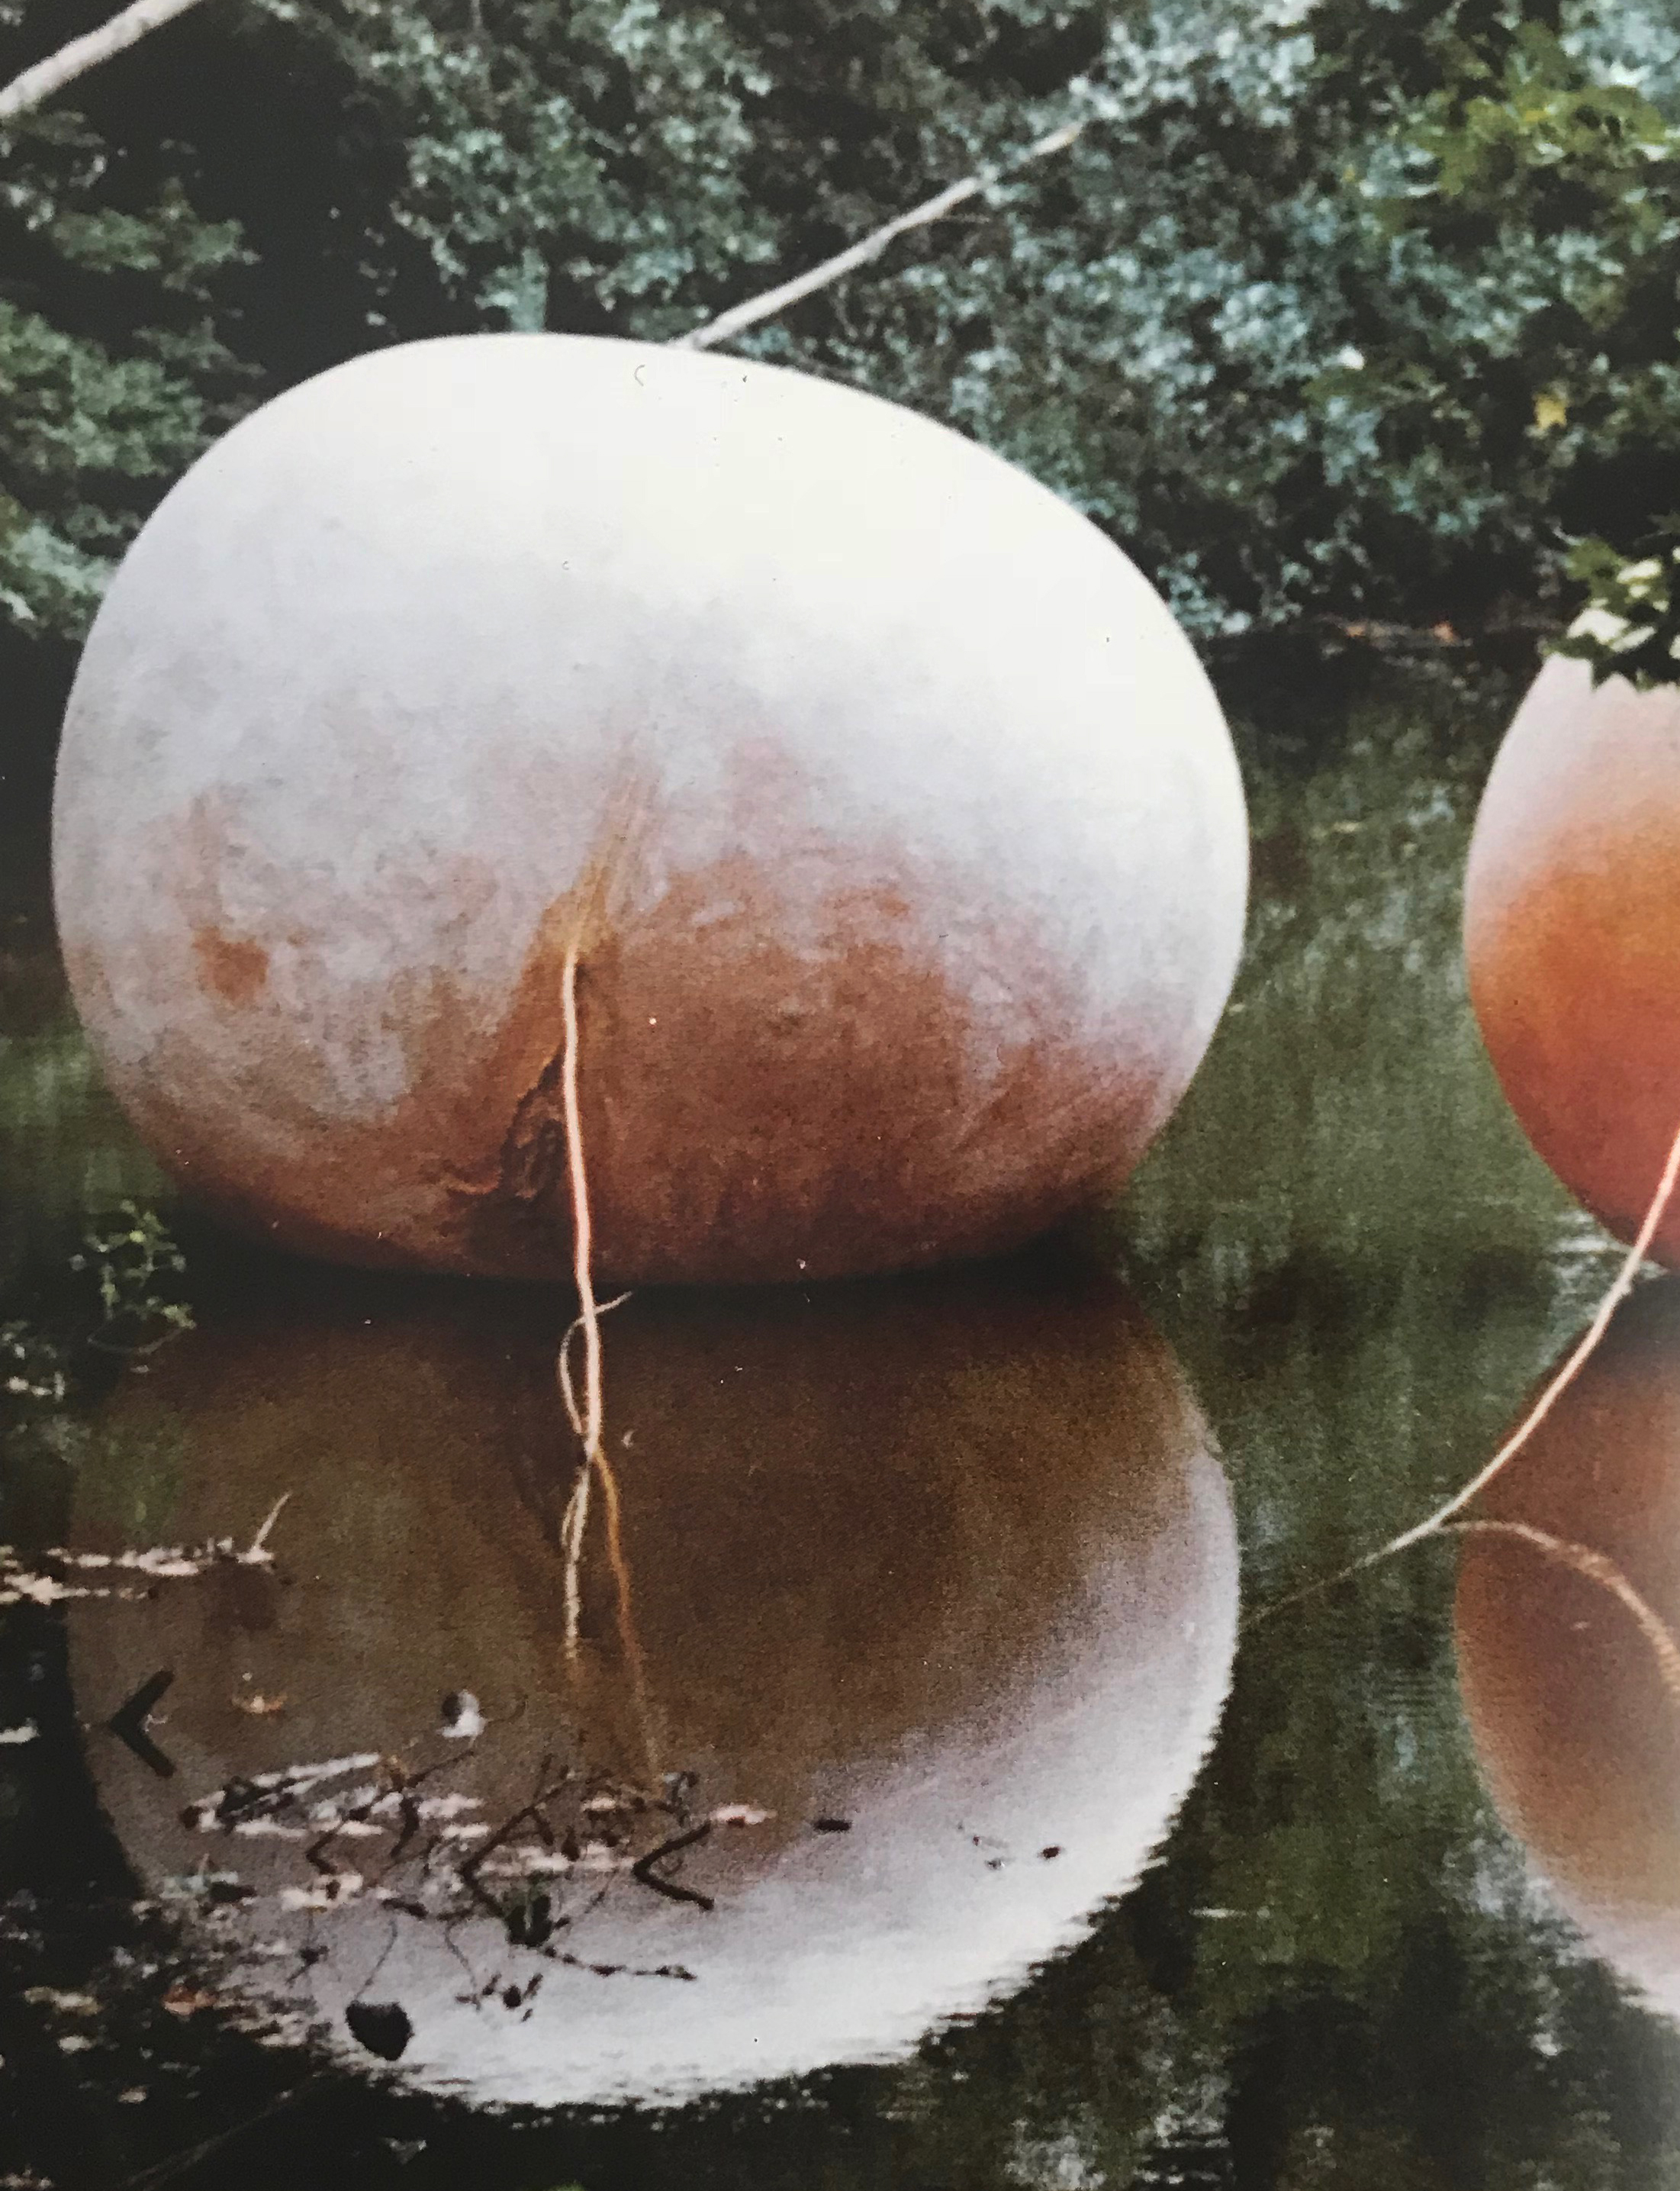 Copy of Untitled_inflated latex at nassau county long island on site installation_1972-74_14x8.jpg